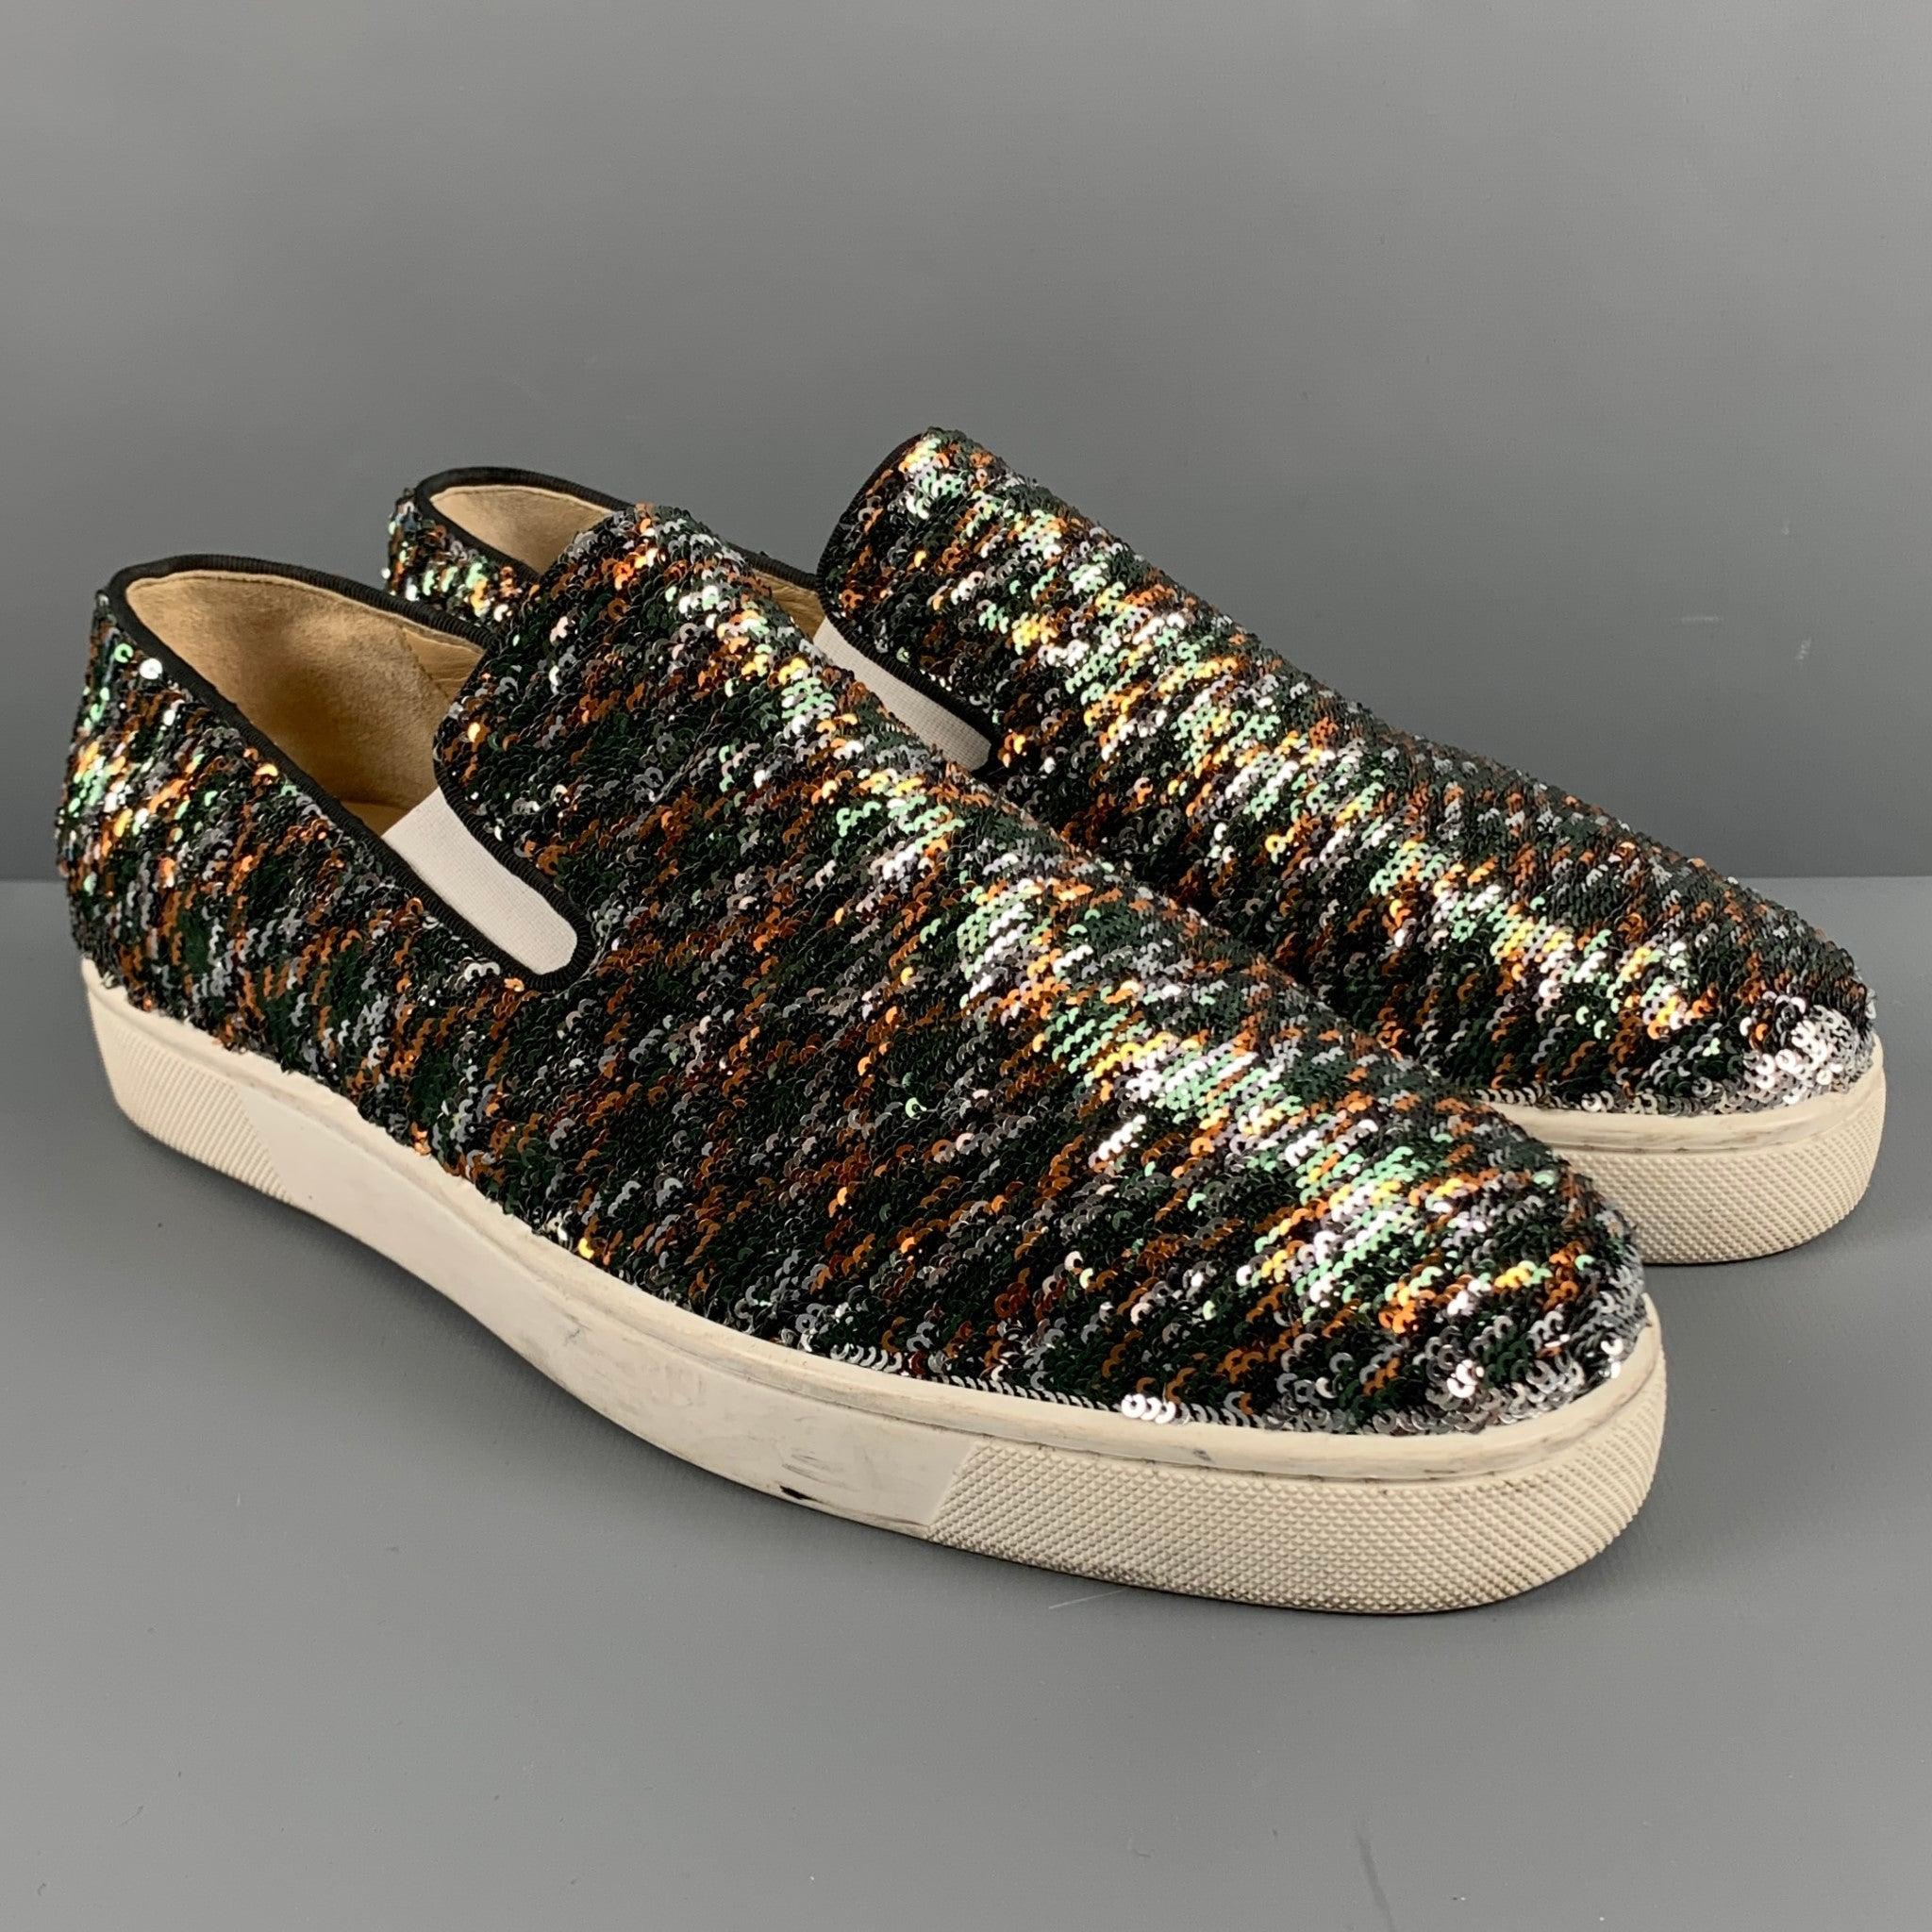 CHRISTIAN LOUBOUTIN sneakers covered in silver mermaid sequins, which when flipped to the other side, reveals a multi-color plaid pattern. These shoes feature a slip on style, and signature Louboutin red sole.Excellent Pre-Owned Condition. 

Marked: